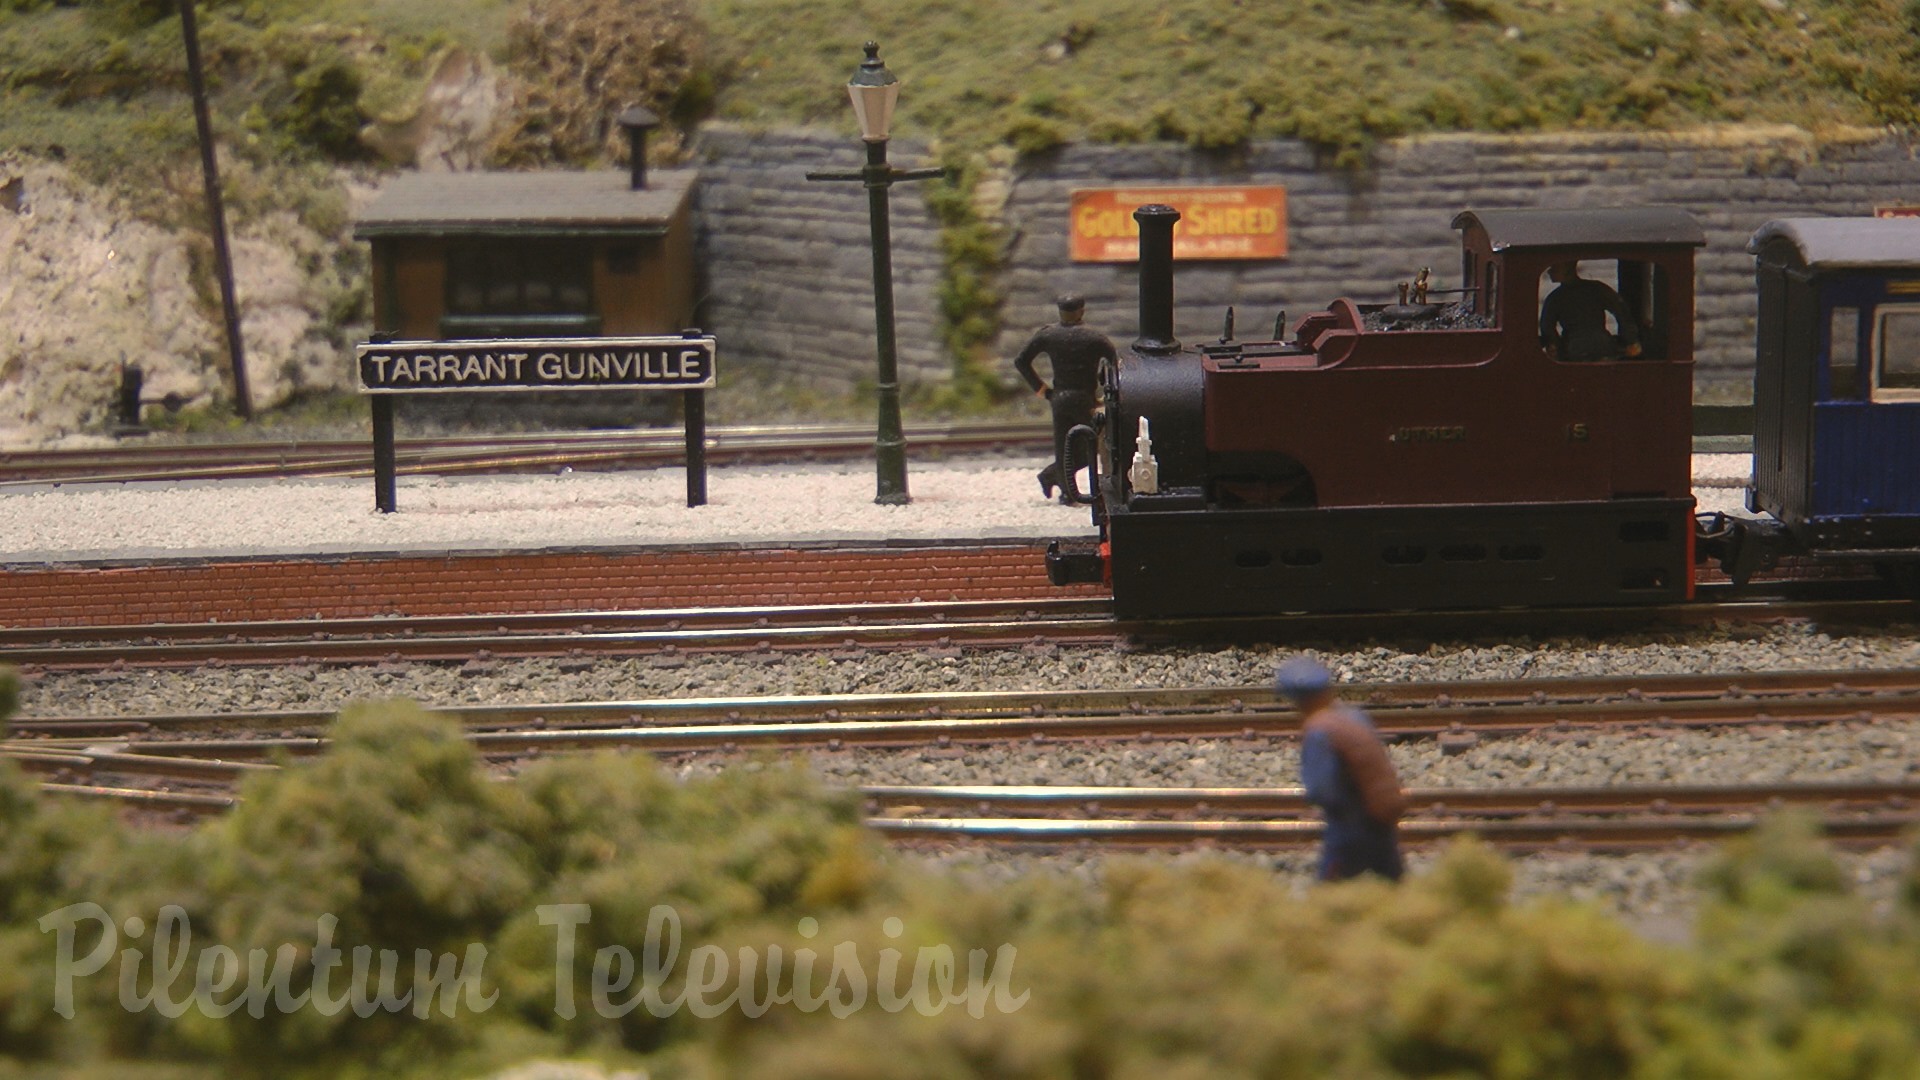 Steam Locomotive (Cab Ride) and Model Trains in Action on Wimborne Railway Society’s Layout